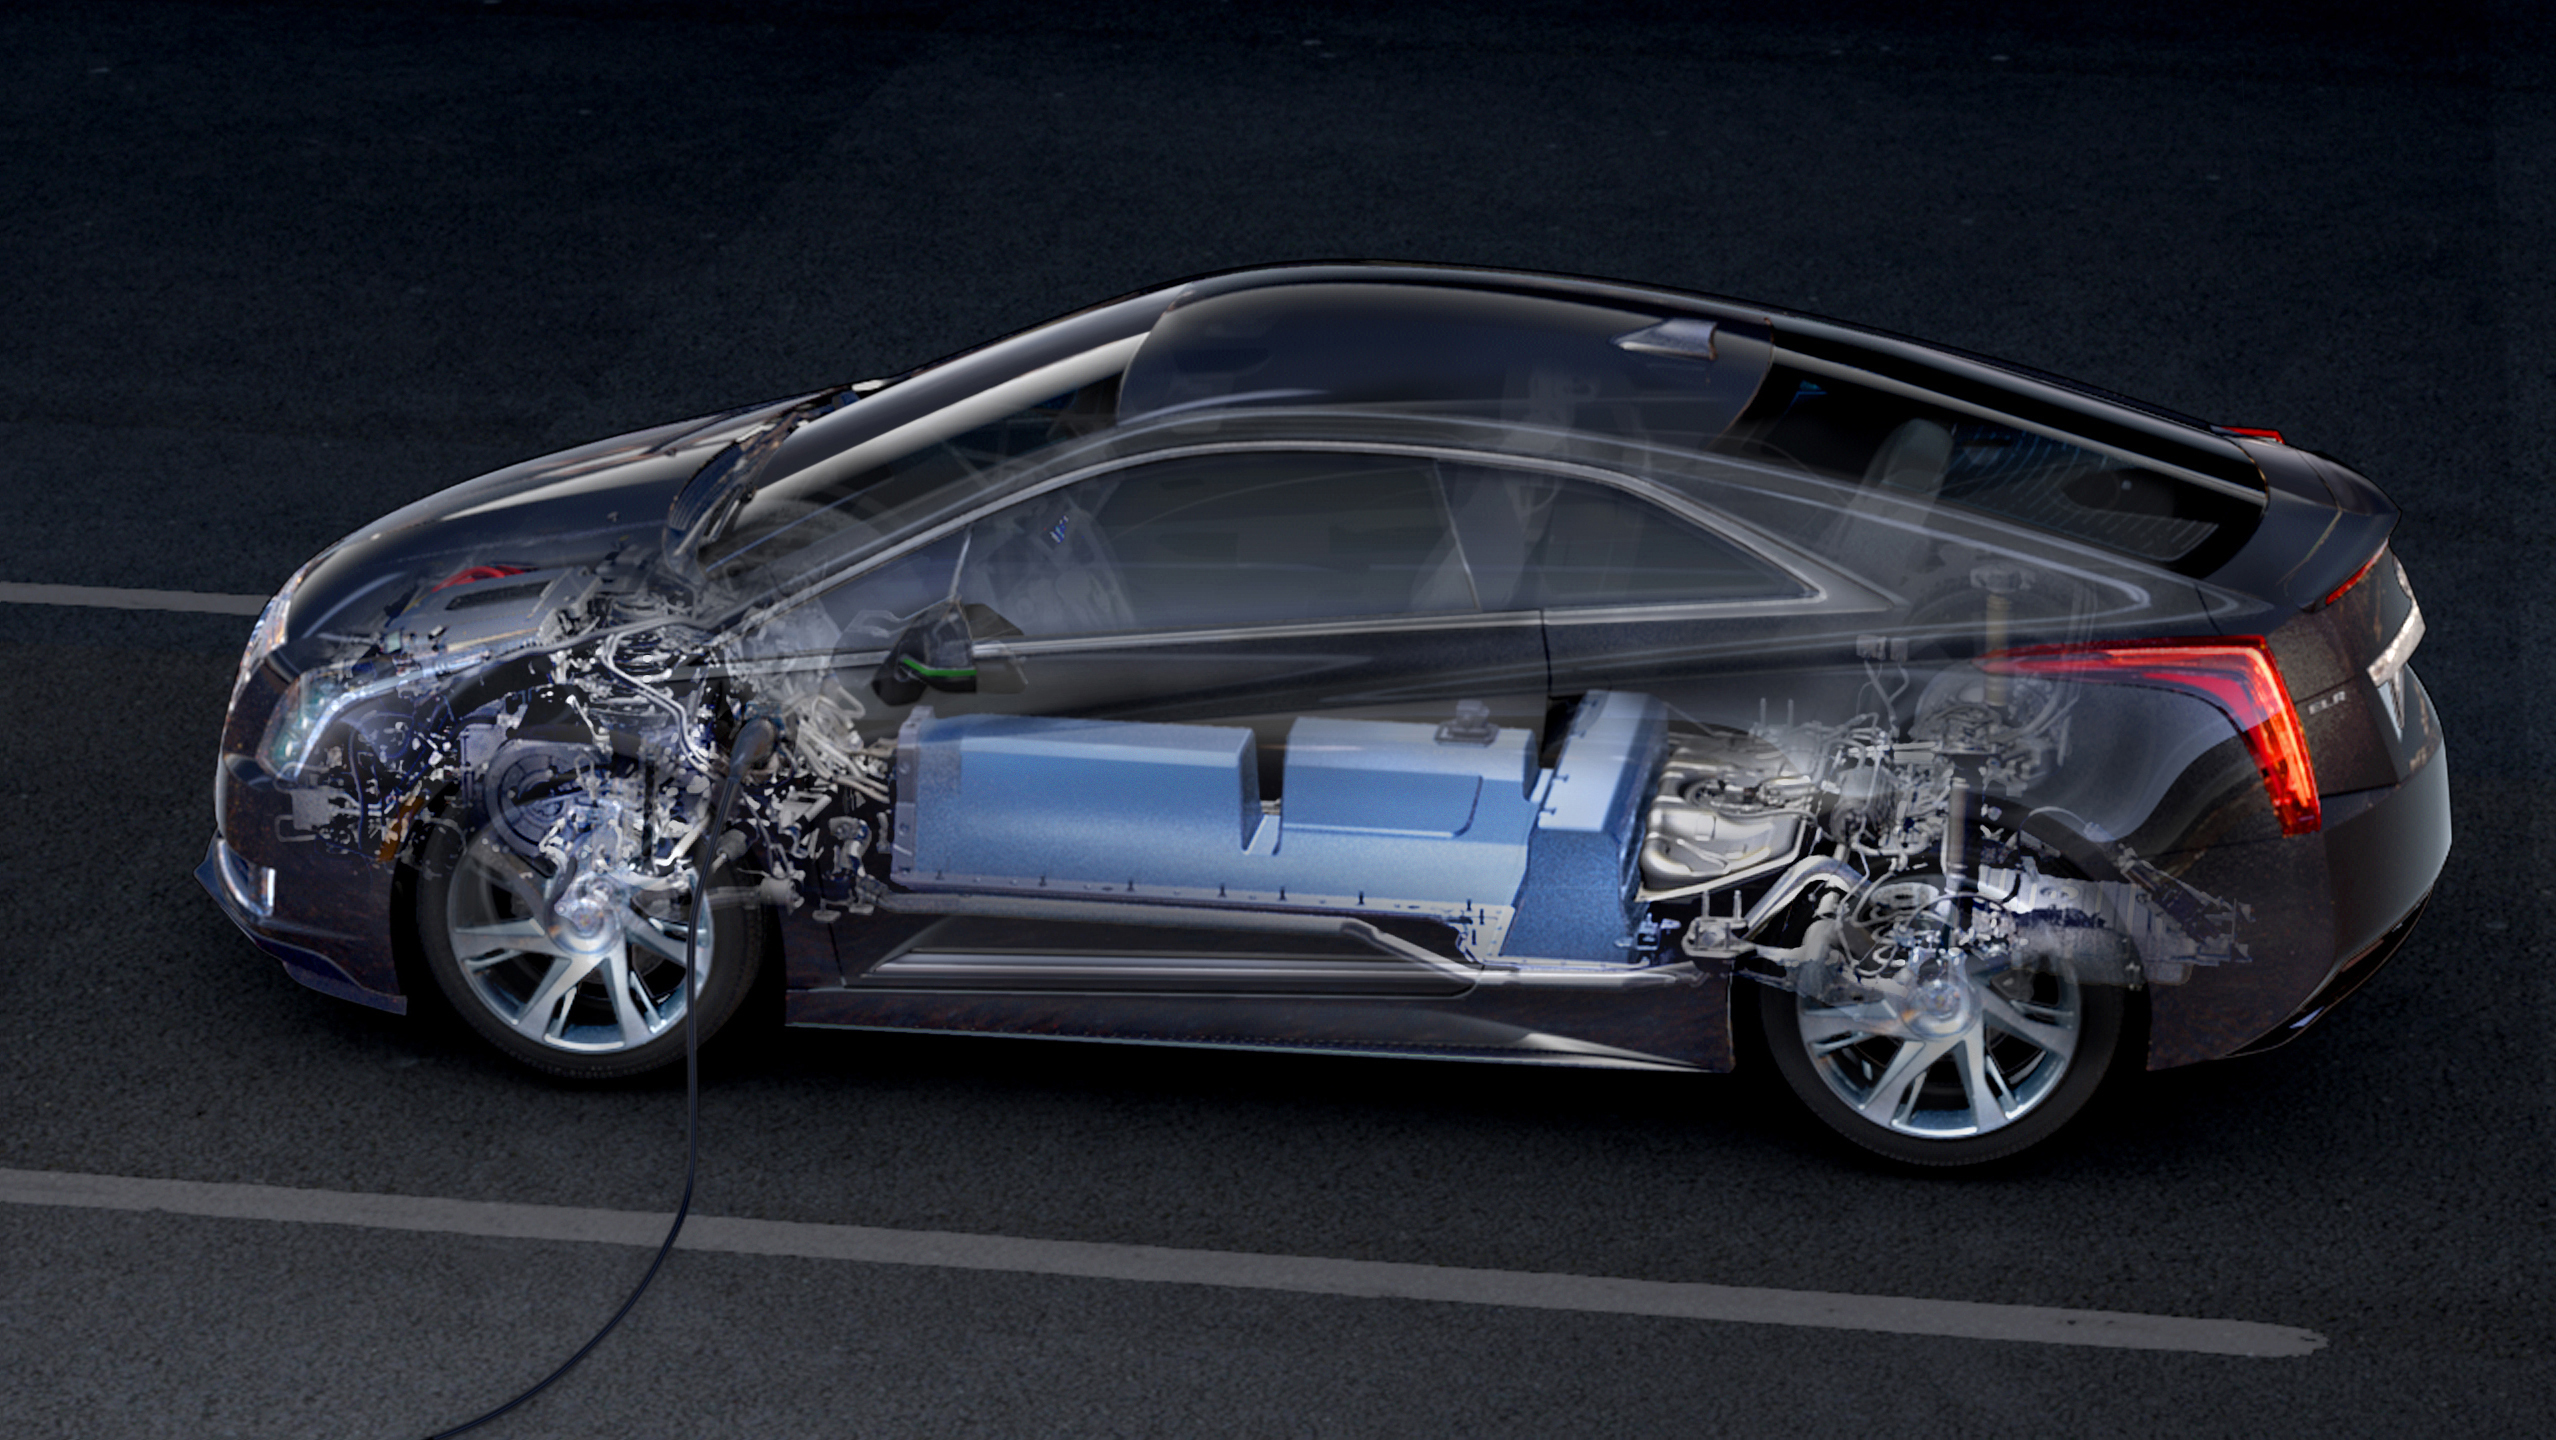 2014 Cadillac ELR battery and propulsion system technology